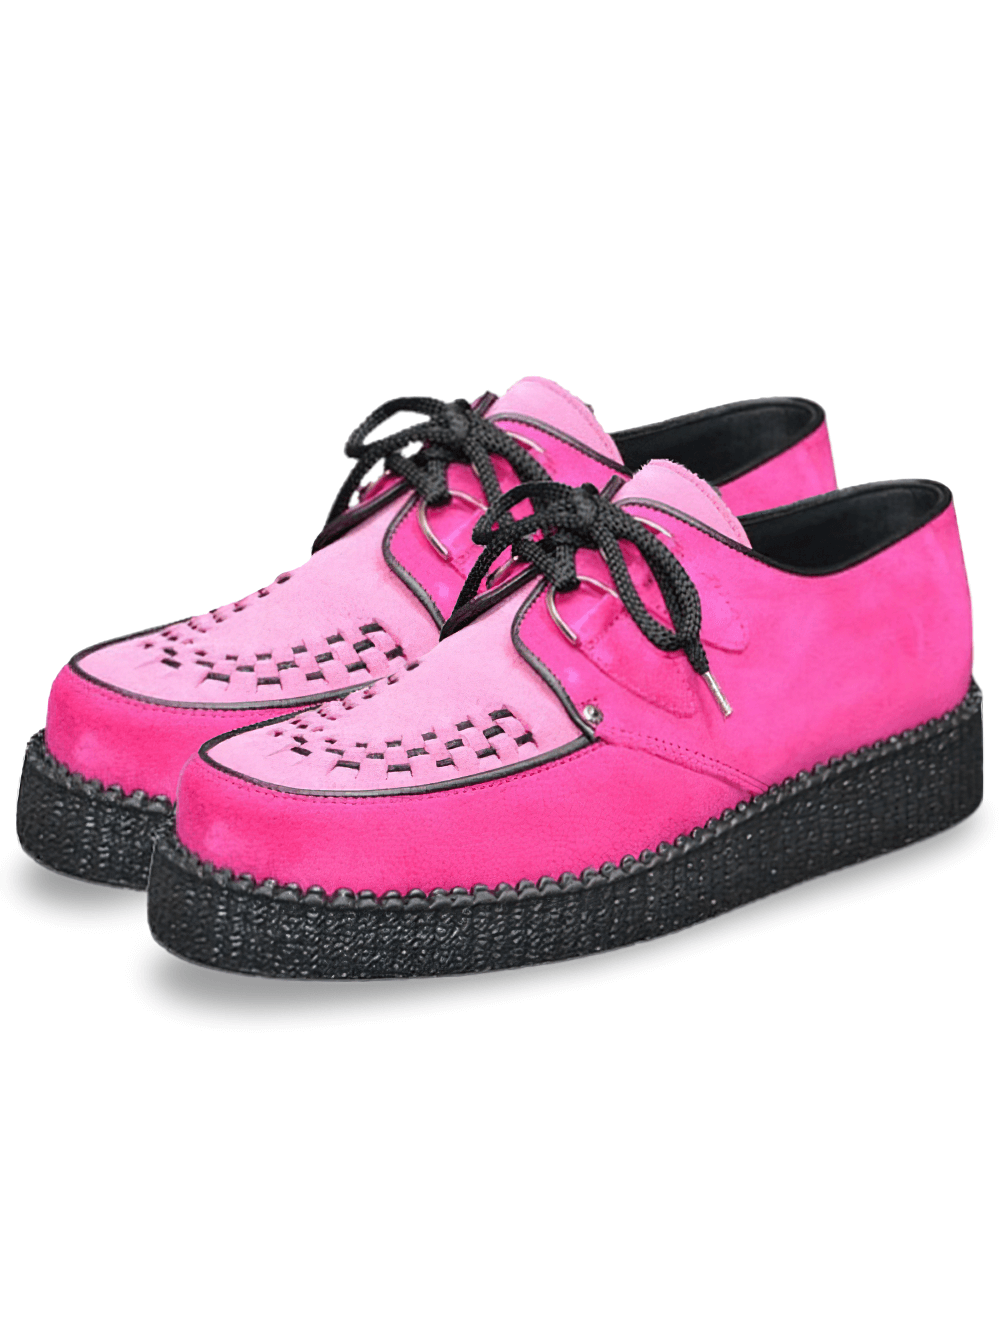 Round Toe Suede Creepers with Microfiber Insole